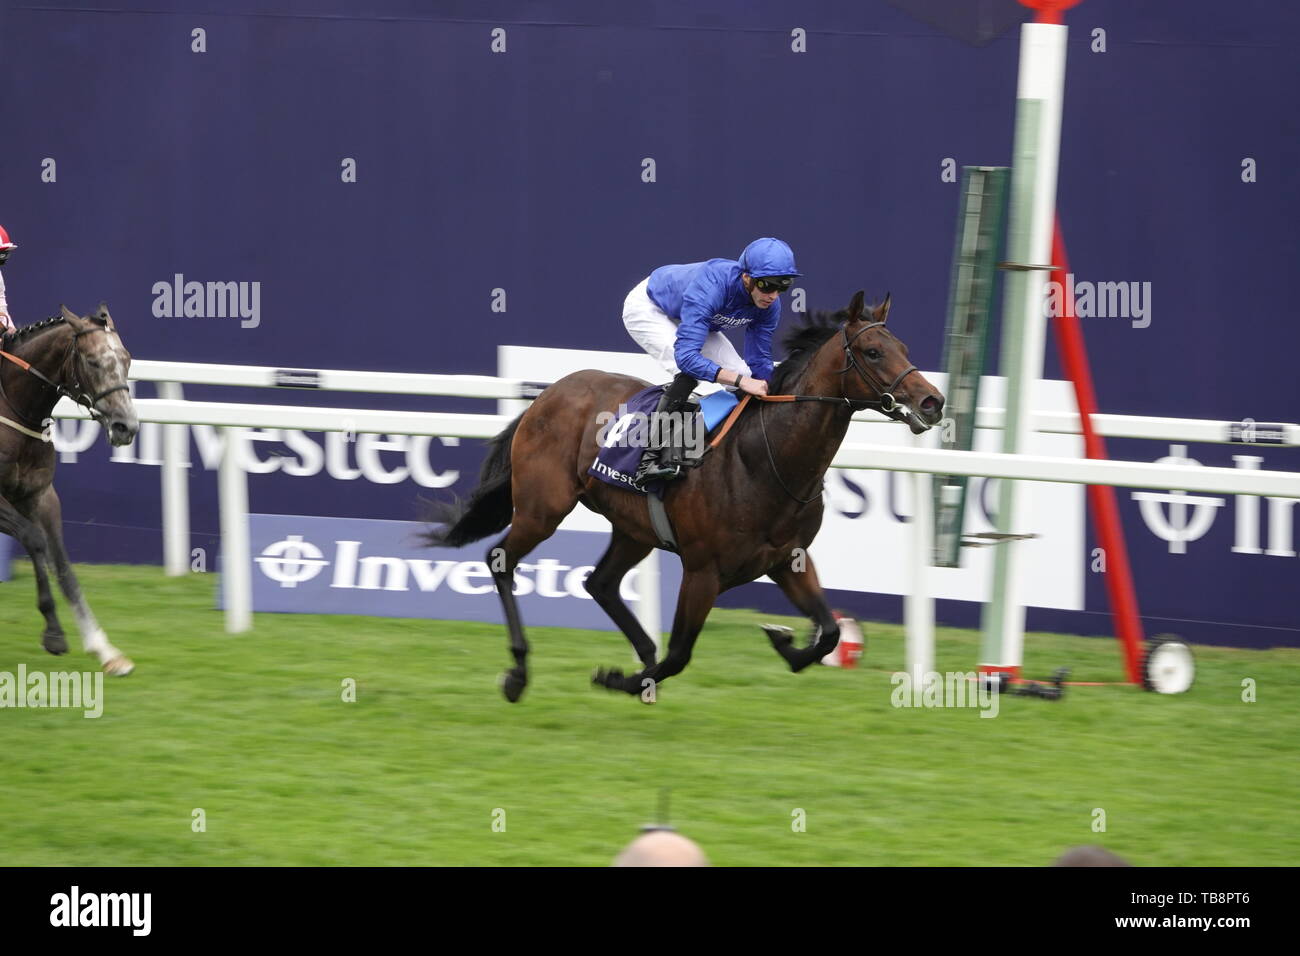 Epsom Downs, Surrey, UK. 31st May, 2019. Pinatubo beats Misty grey in the first race The Investec Woocote Stakes at the Investec Derby Festival - on Ladies Day, classic horse race. Credit: Motofoto/Alamy Live News Stock Photo